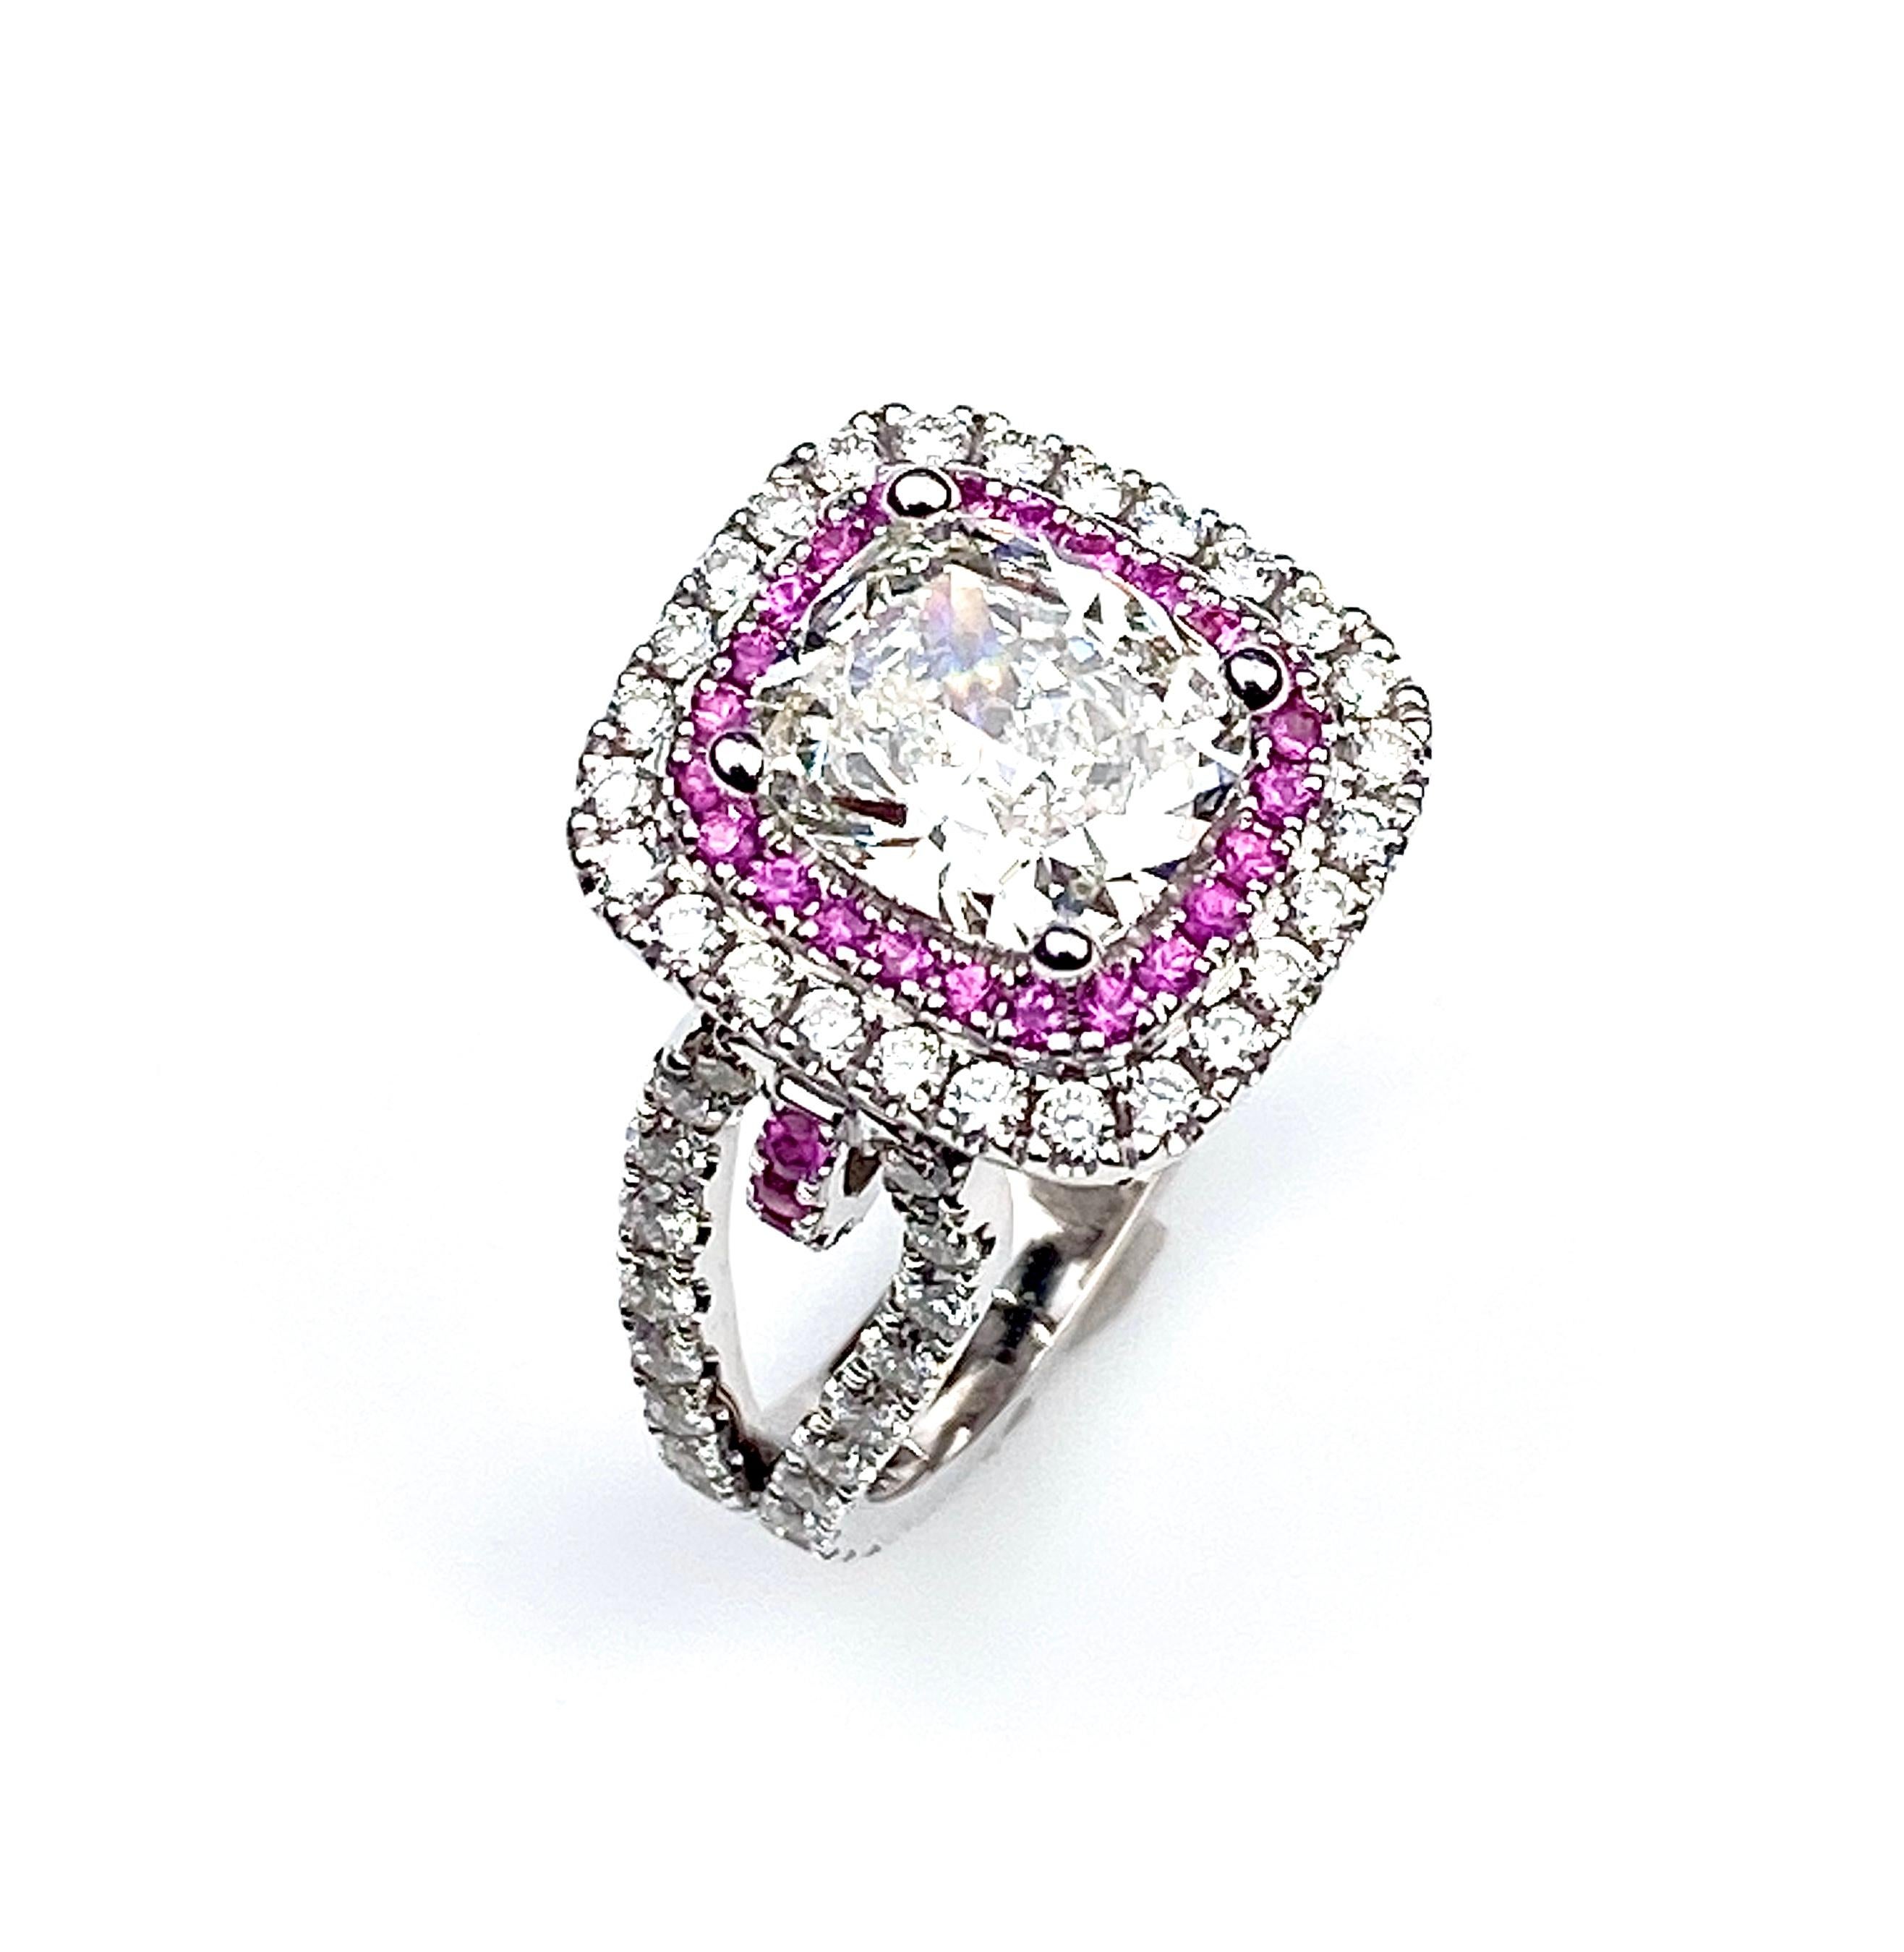 Double halo engagement ring with 1.70ct rectangular cushion cut center diamond H colour SI1 clarity, GIA #7272006151. Set with pink sapphire halo of 0.27ct total  and diamond-set outer halo, loop shank and petal pave' under-gallery, 1.27ct total.